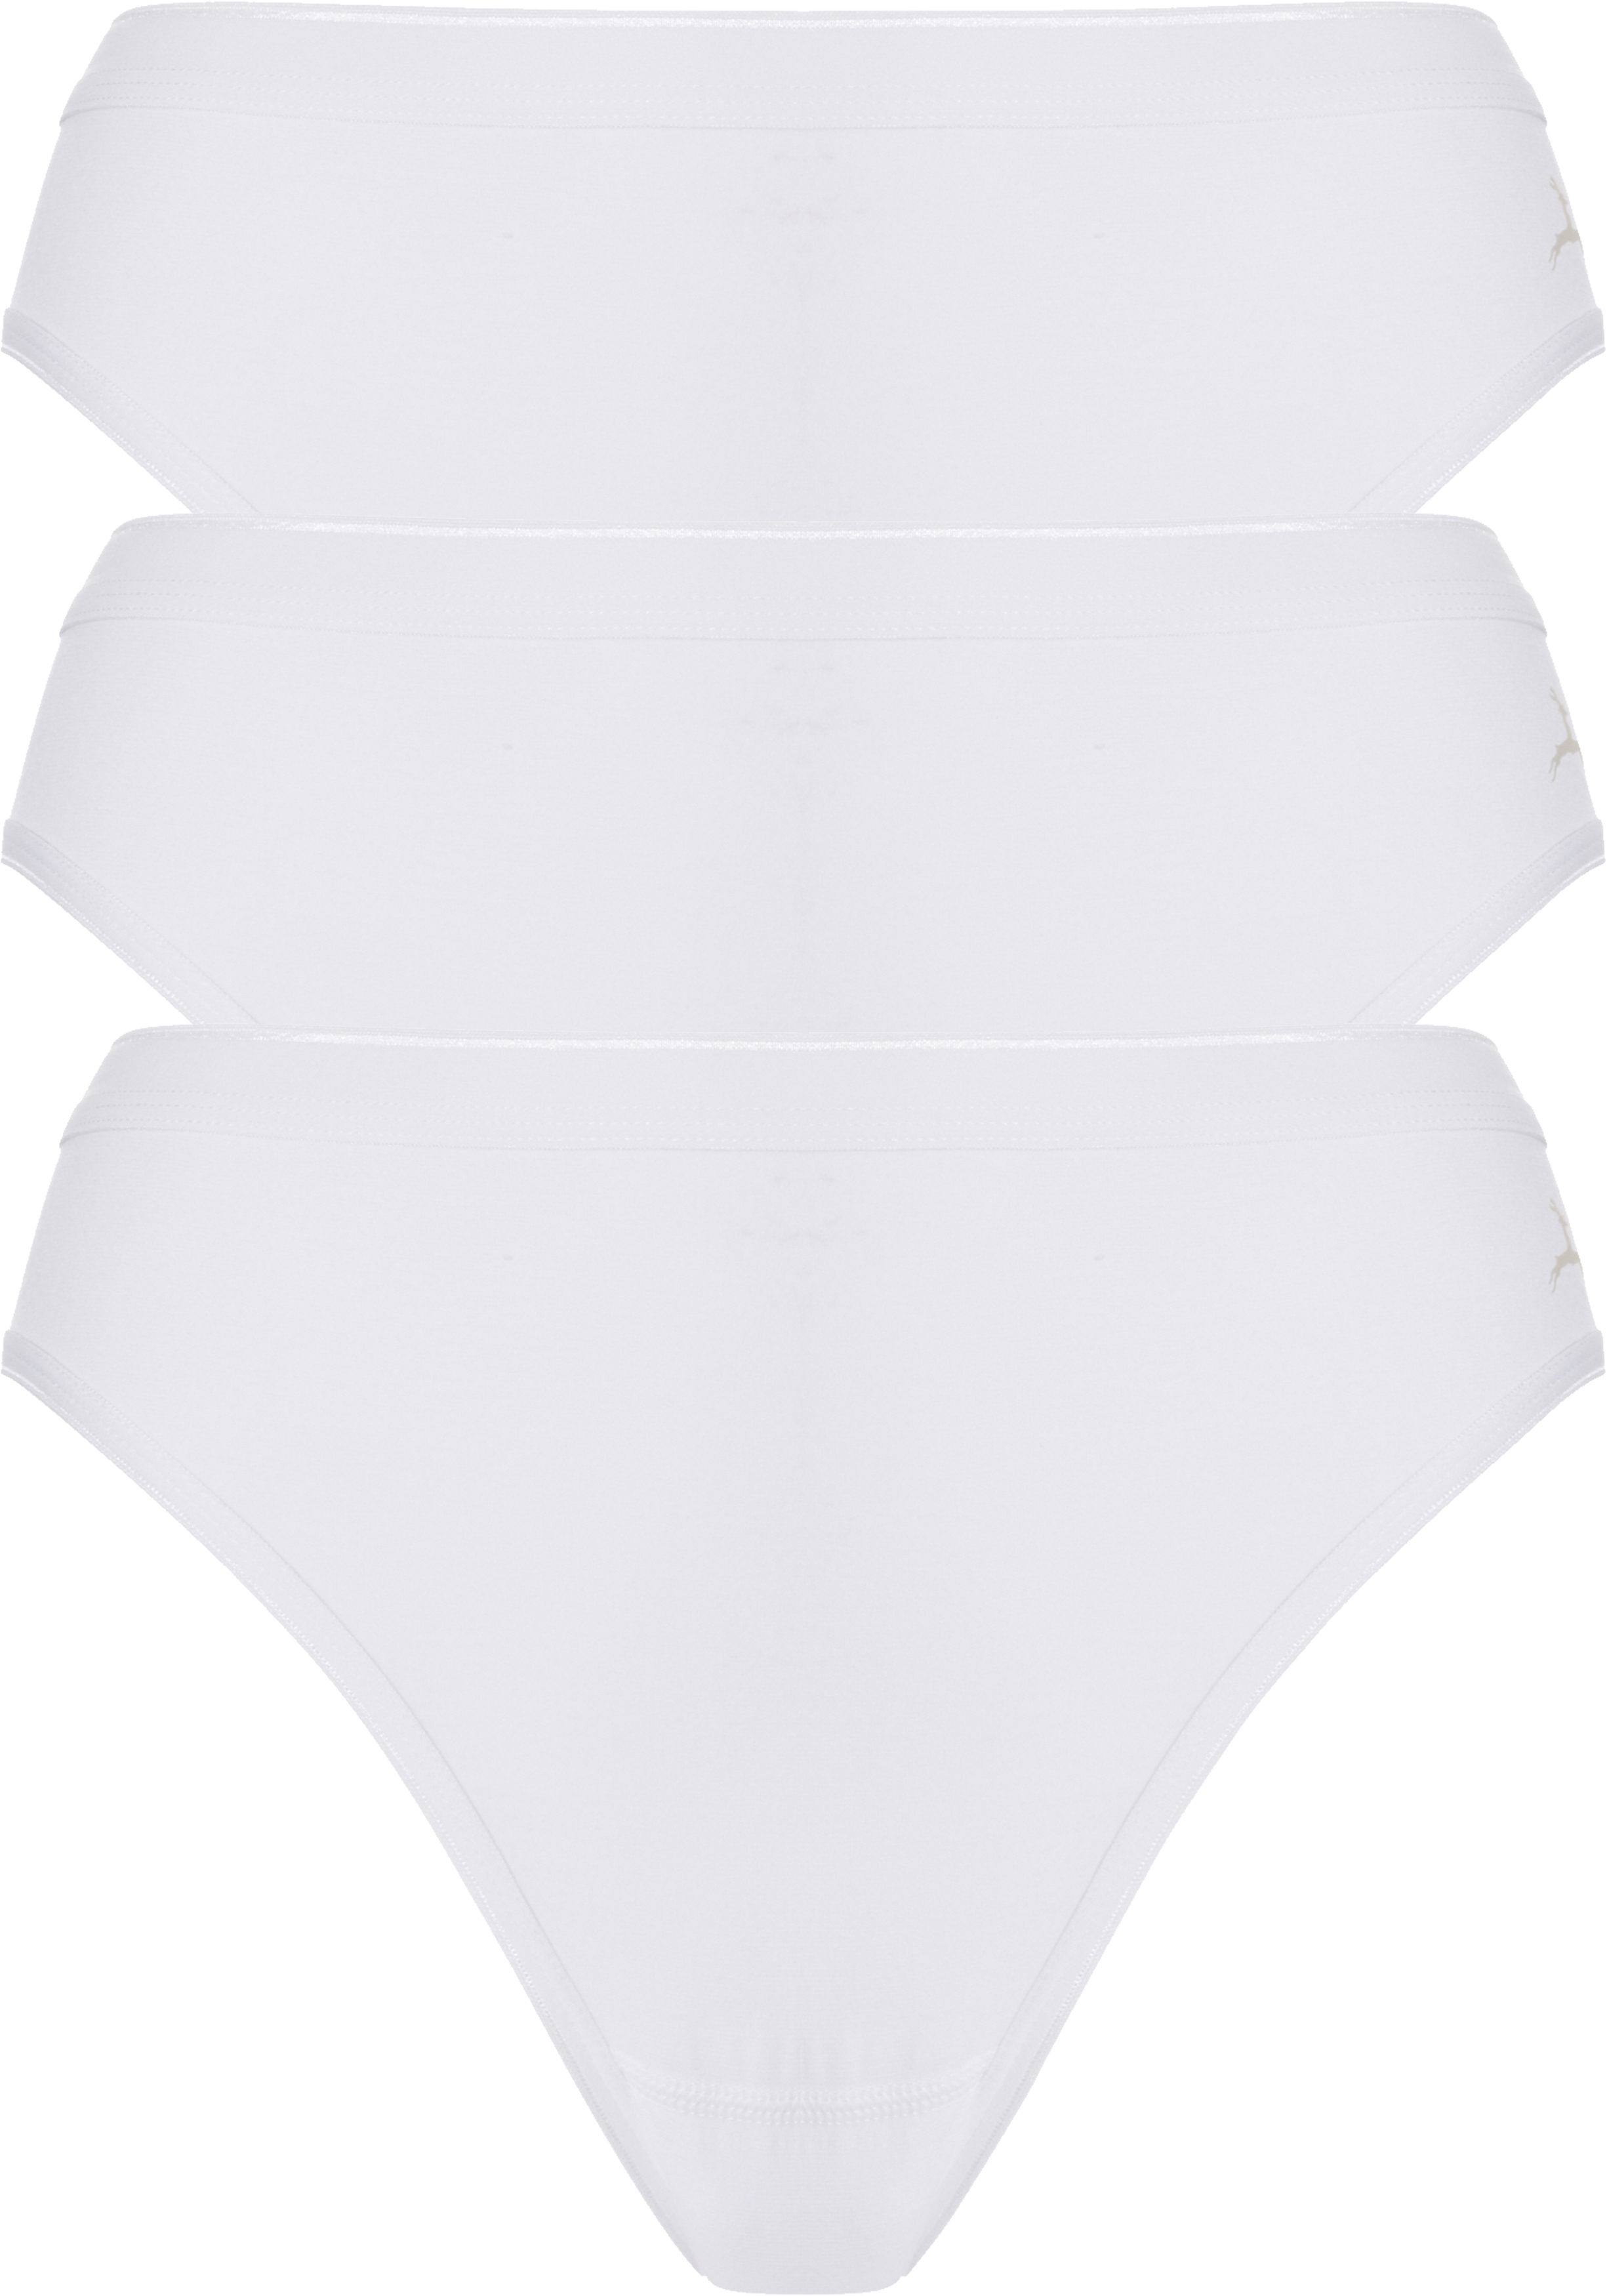 ten Cate Basic women rio (3-pack), dames slips lage taille, wit